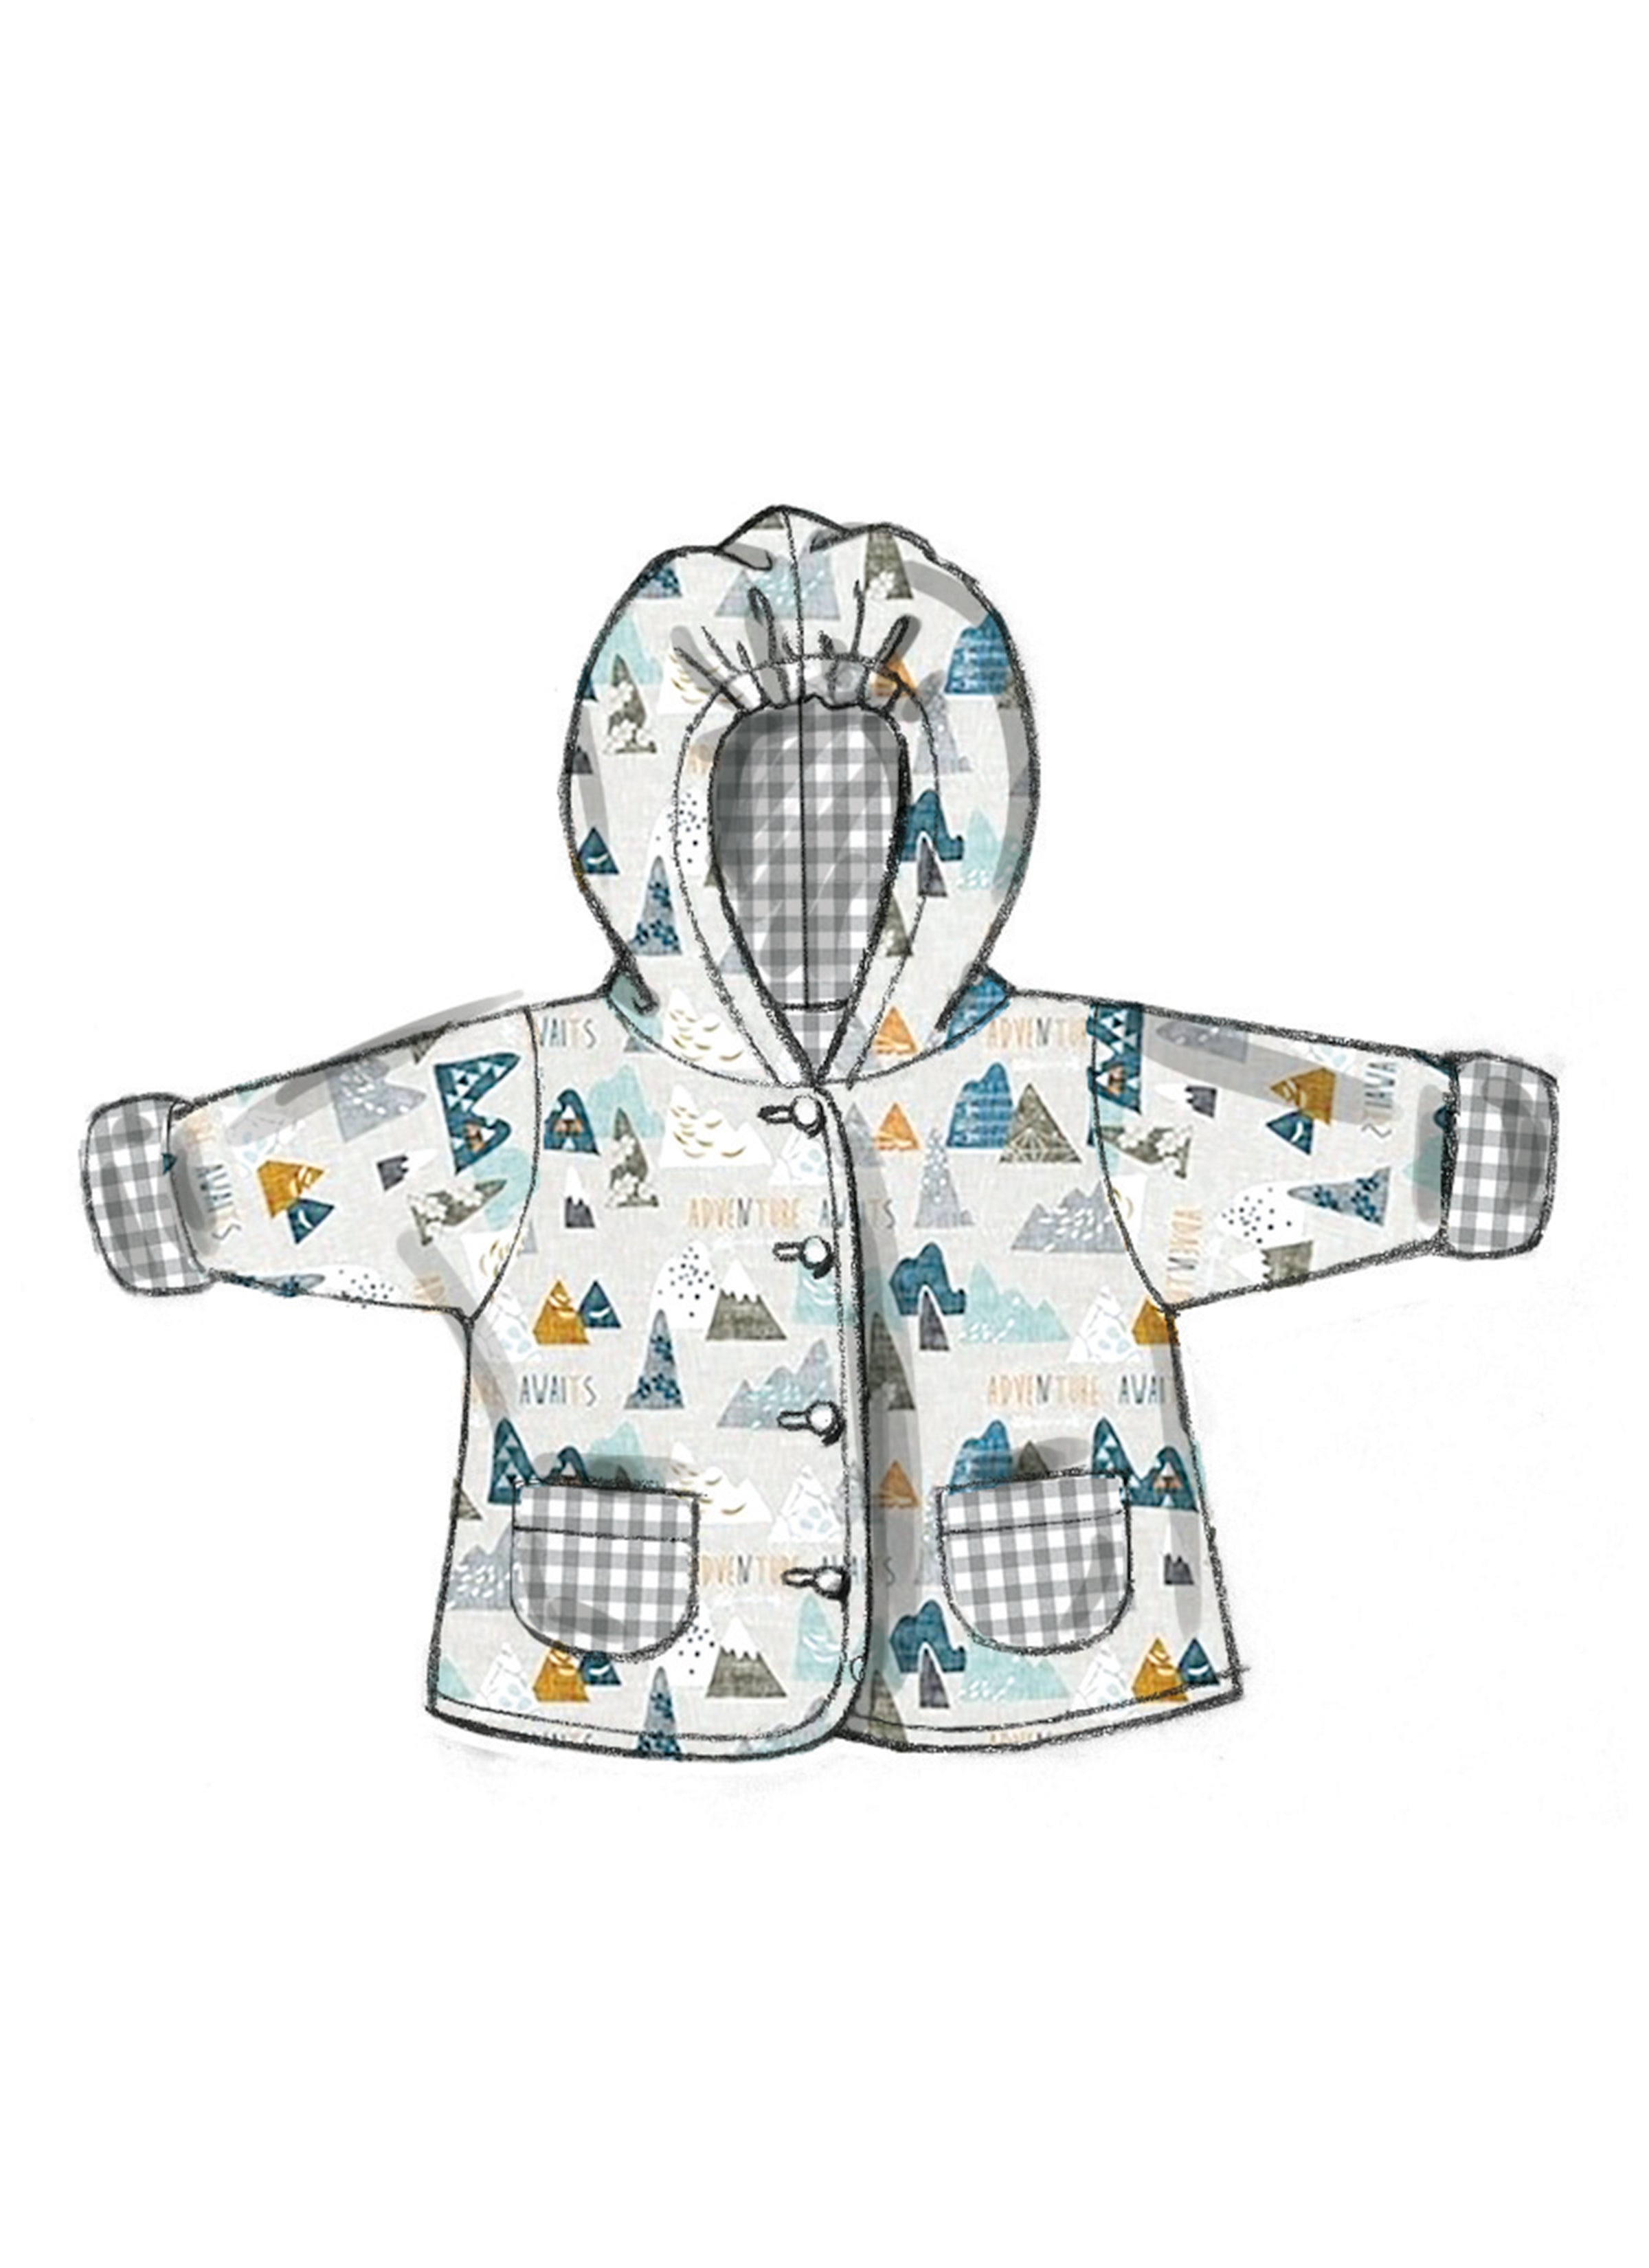 Butterick pattern 6969 Infants' Jacket, Overalls, Pants, Hats and Mittens from Jaycotts Sewing Supplies